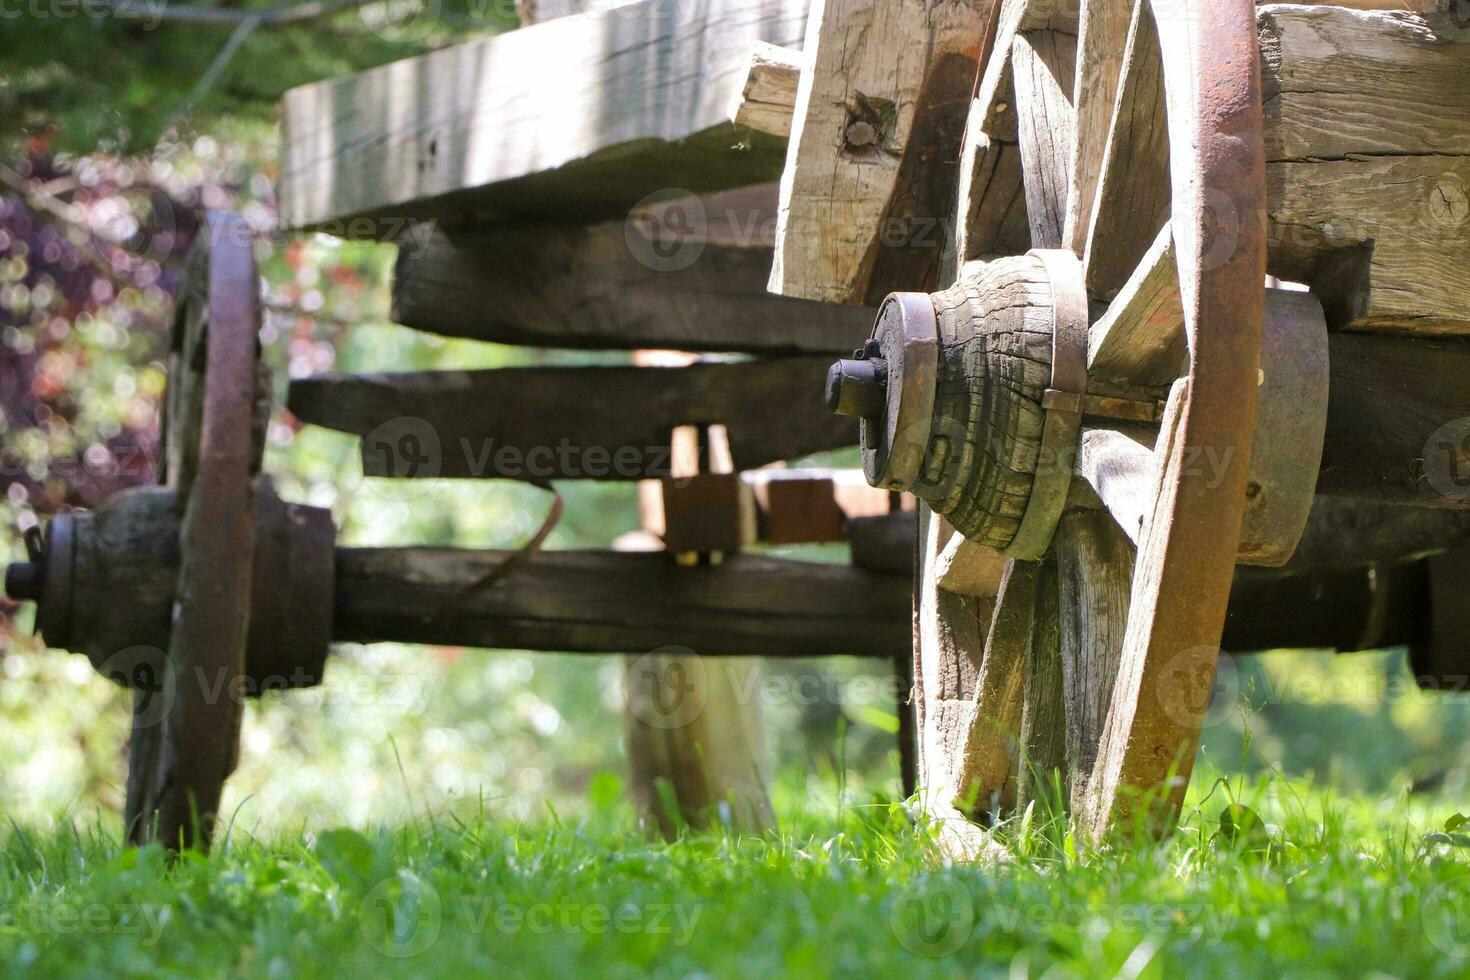 An old wooden cart with large wheels in the farm with forest background photo